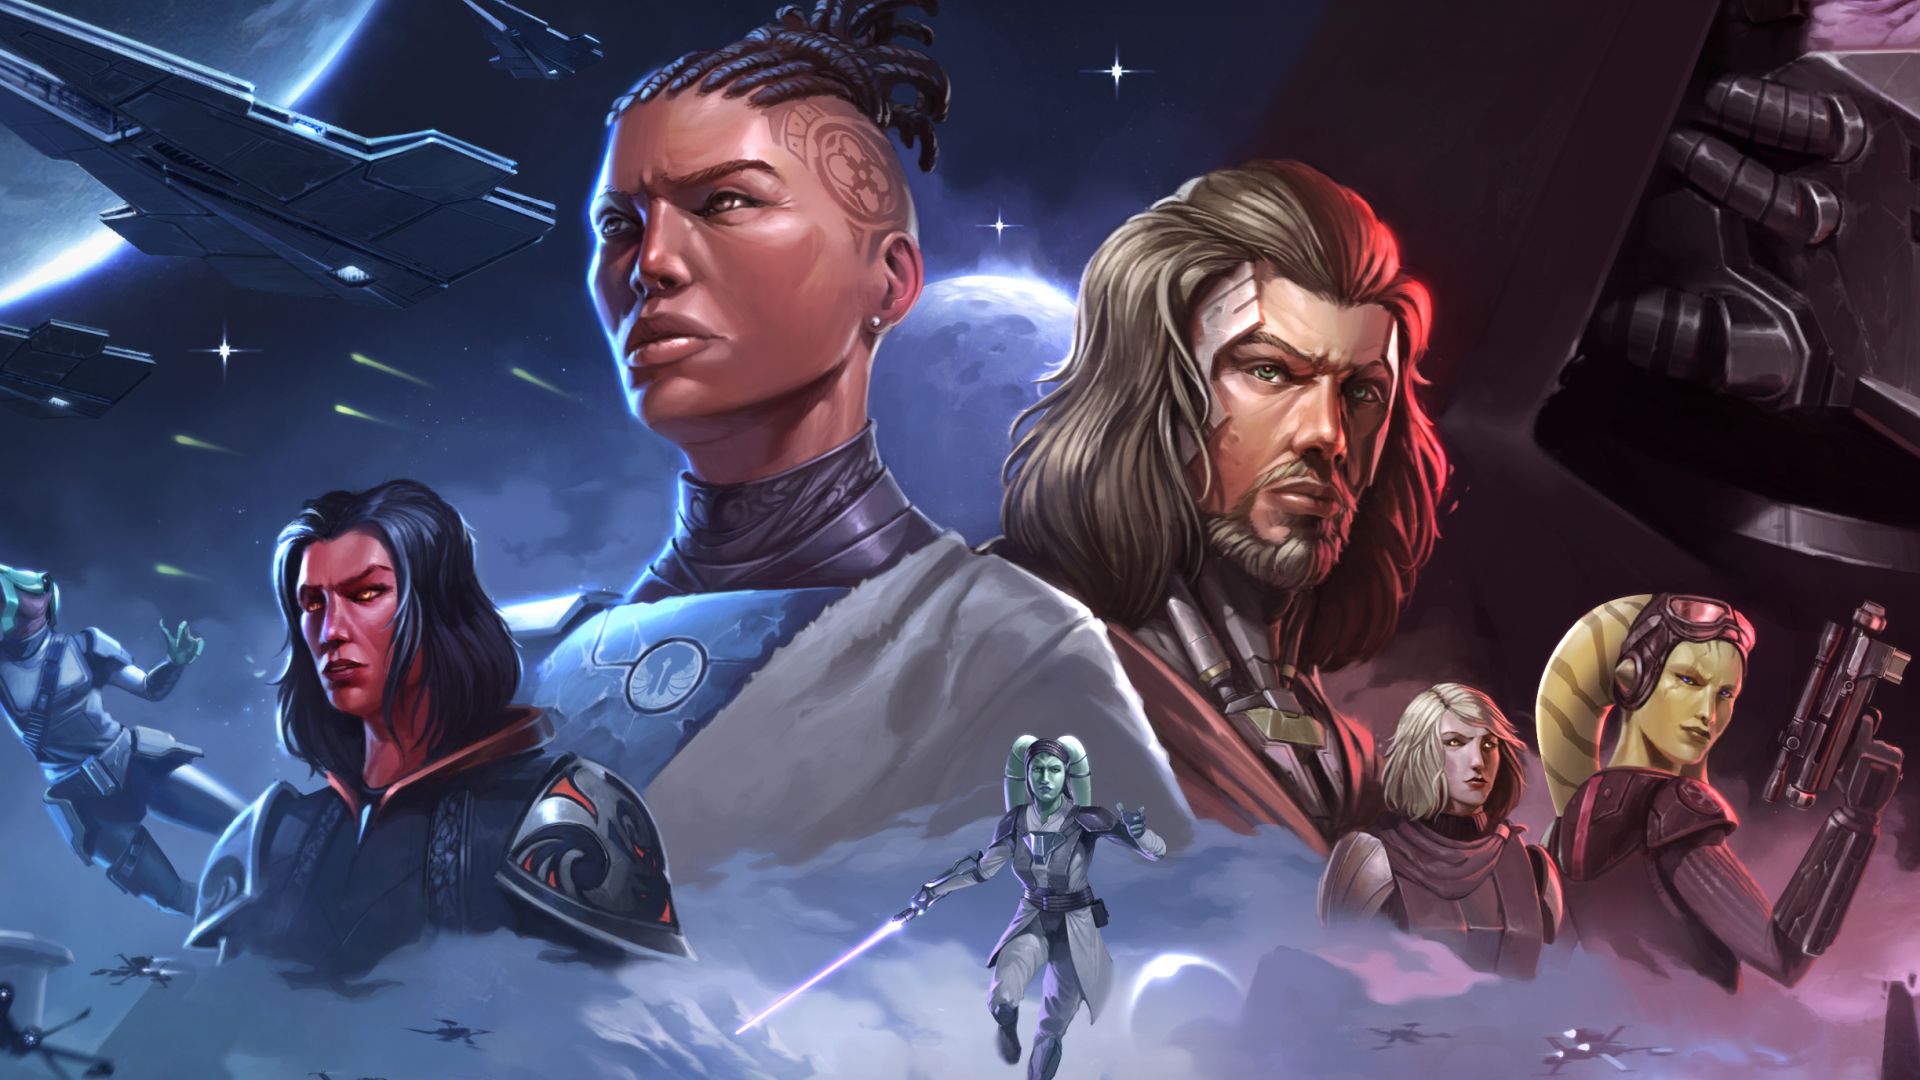 Broadsword Online Prepares to Take the Helm of Star Wars: The Old Republic as BioWare Redirects Focus